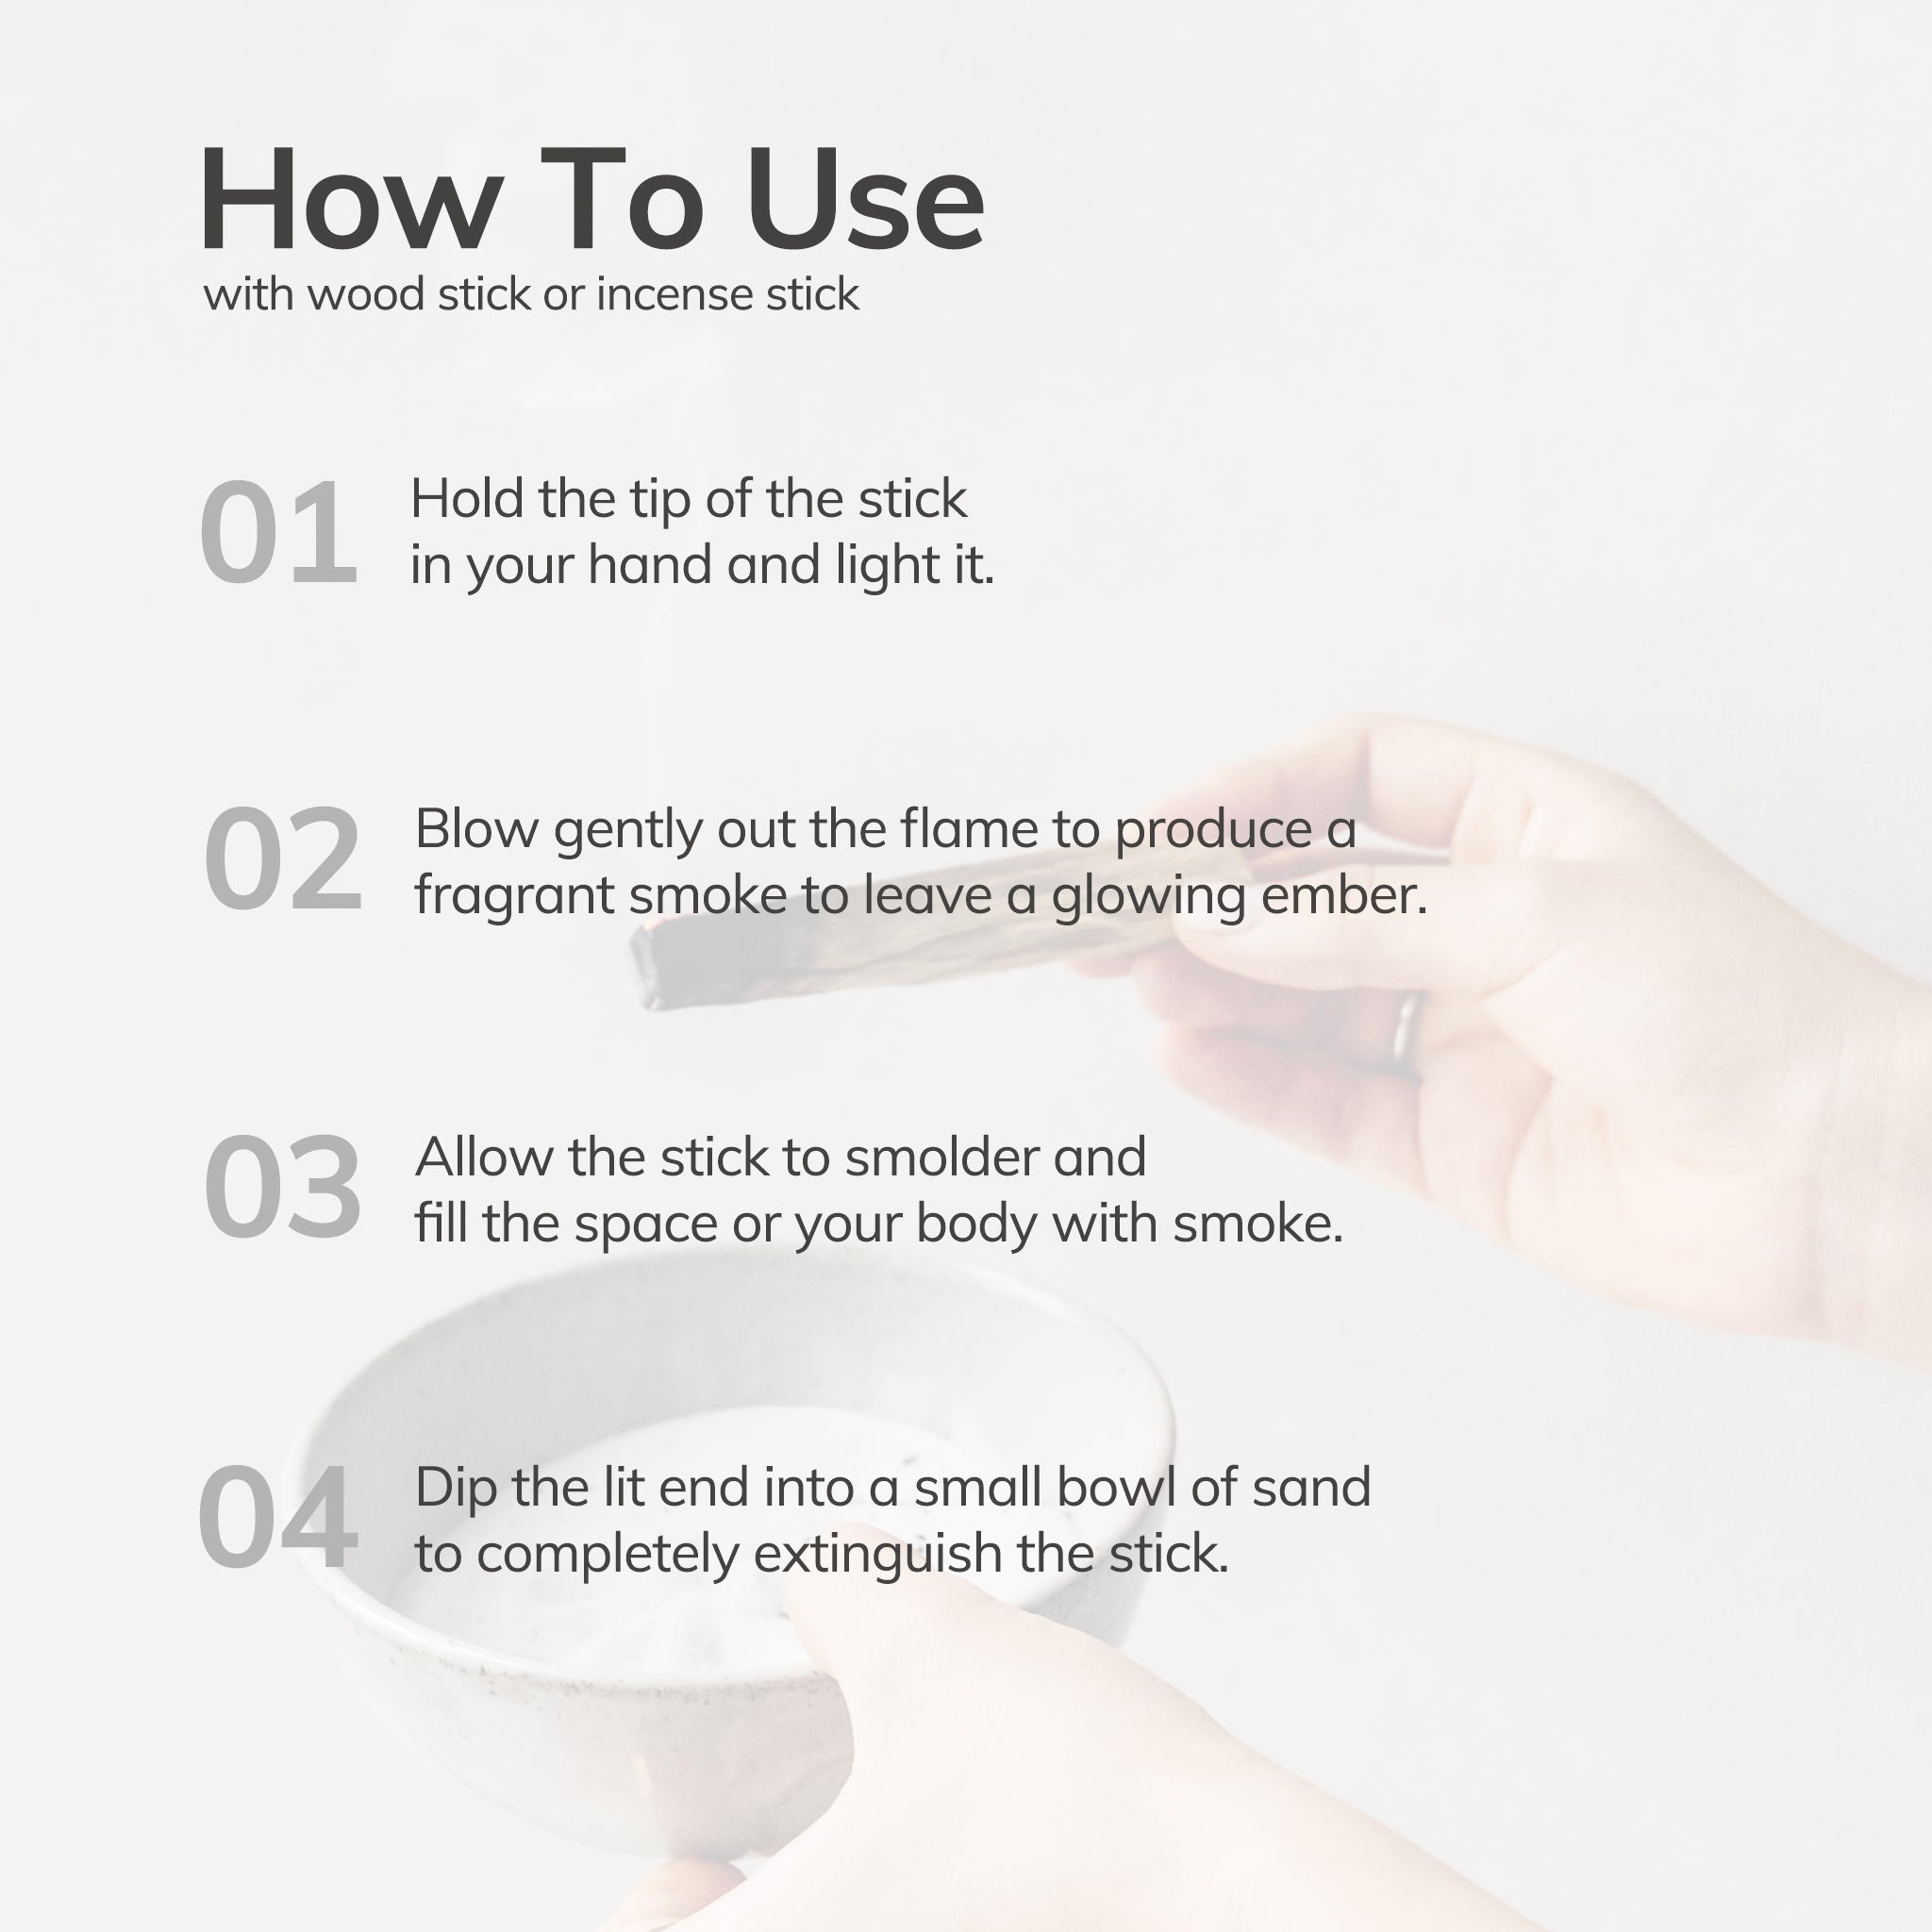 Chronological list of how to use with mini black coapl incense stick.